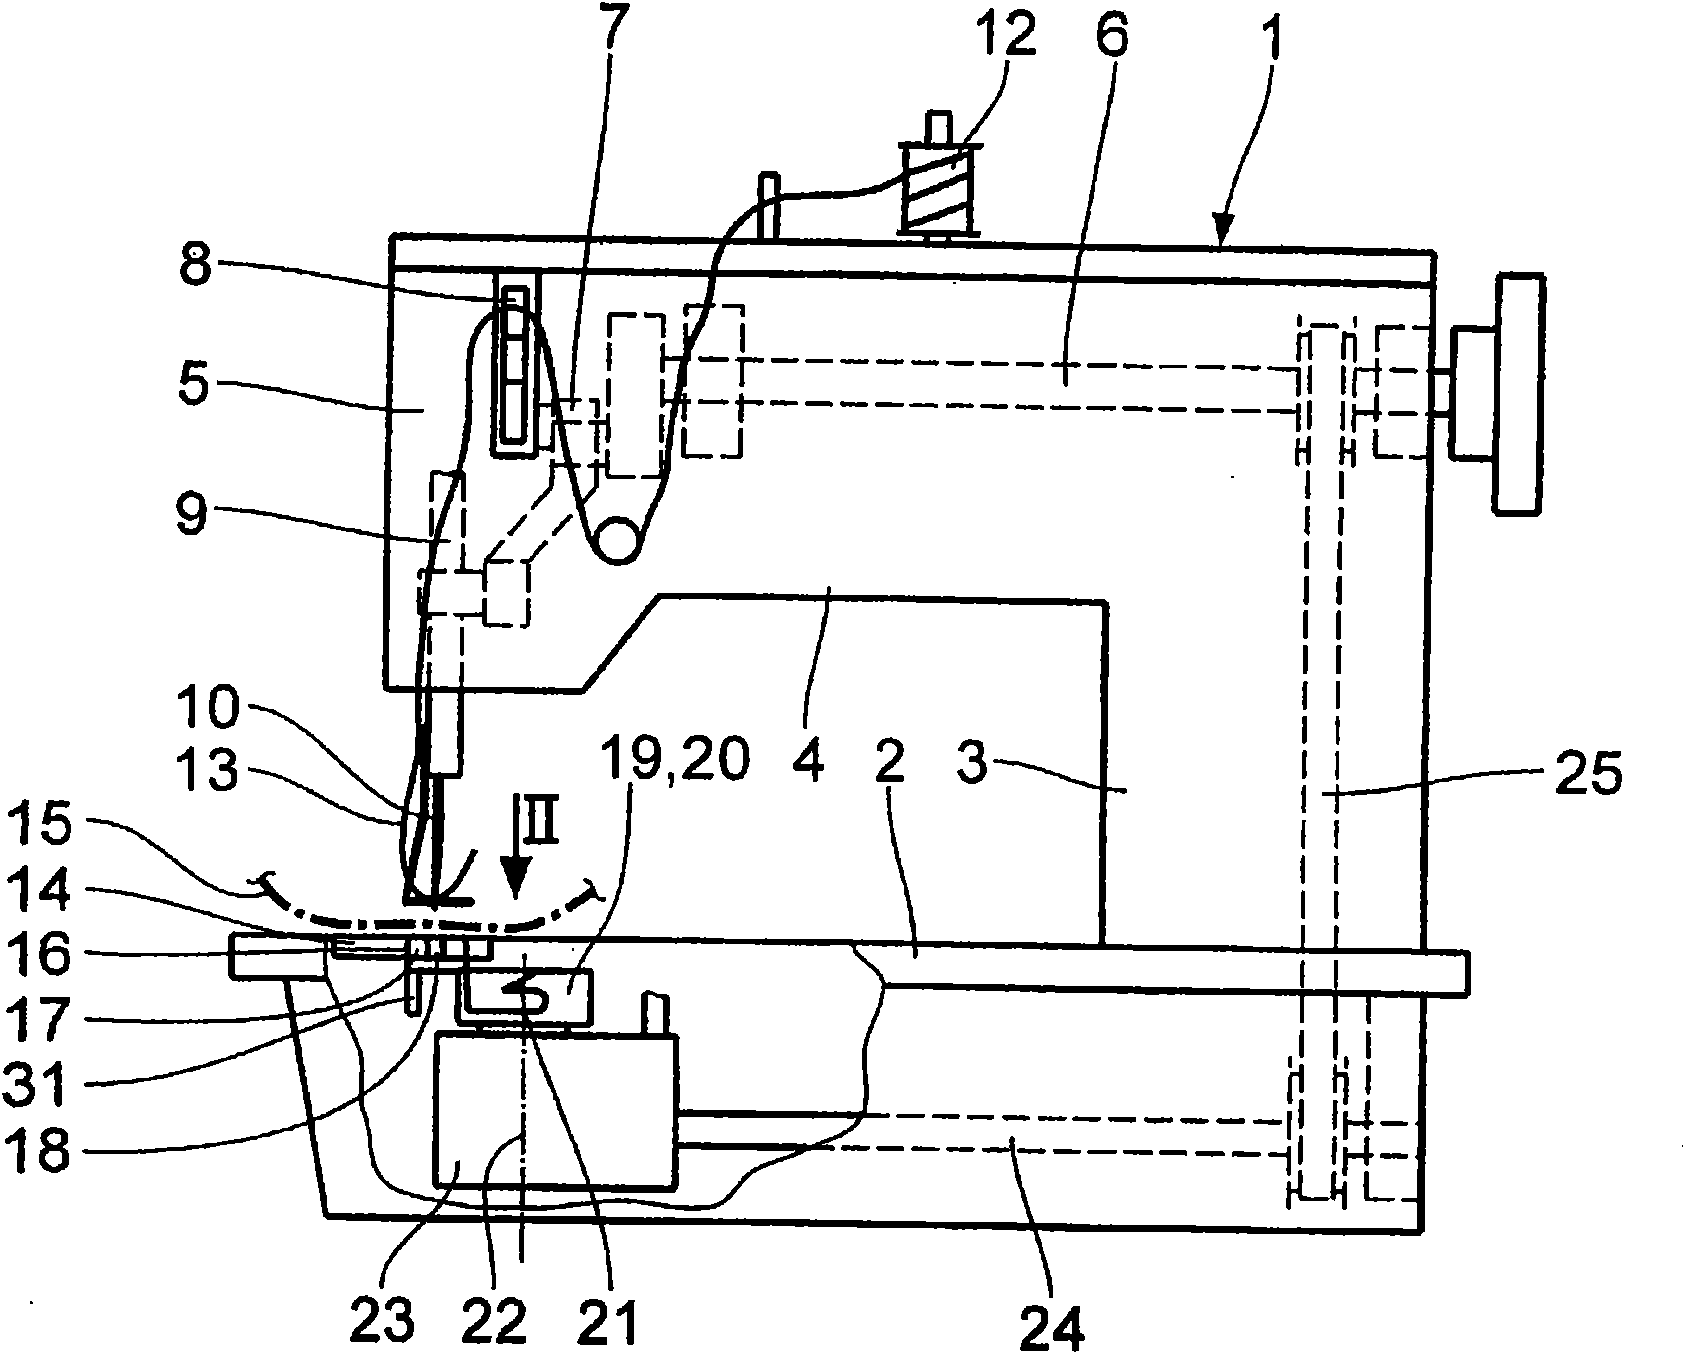 Transporter for transporting sewing material while operating a sewing machine